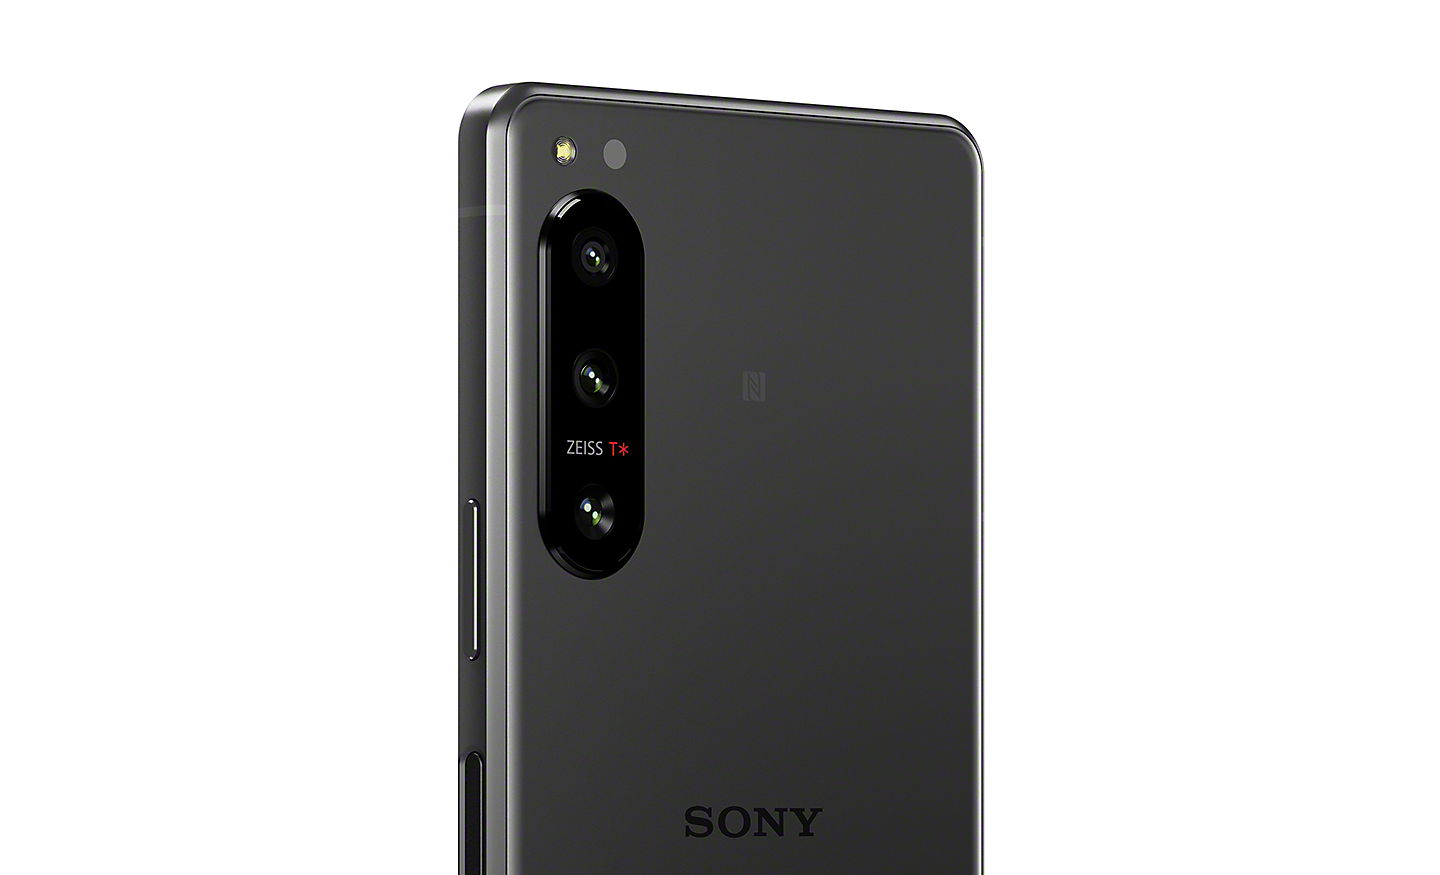 Close-up of triple lens camera on Xperia 5 IV showing logo for ZEISS T* coating